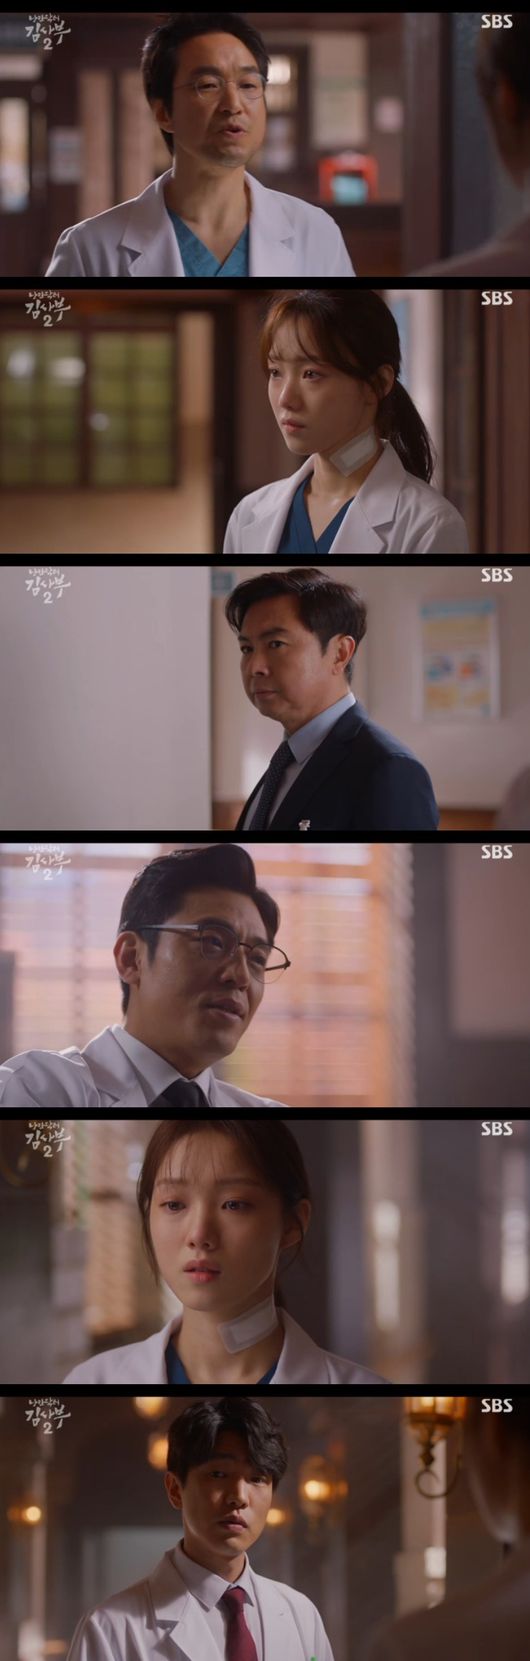 Lee Sung-kyung was placed in the fire DDanger as Kim Joo-heon and Han Suk-kyu in Romantic Doctor Kim Sabu 2 skyrocketed opinions whether to save the murder Weapon number.The confrontation between Park Min-guk (played by Kim Joo-heon) and Kim Sa-bu (played by Han Suk-kyu) soared in SBS Mondays drama Romantic Doctor Kim Sa-bu Season 2 (directed by Yoo In-sik, Lee Gil-bok, play by Kang Eun-kyung) broadcast on the 27th.Park Min-guk (Kim Joo-hun) became independent with Do Yun-wan (Choi Jin-ho). The two people were in conflict with each others operating values.When asked about Bu Yong-jus Kim Sabu (Han Suk-kyu), Do Yun-wan said, I feel what he is in the Hospital, but I will show the truth. Kim Sabu is a self-righteous and dDangerous belief, how bad the value of believing it is right, the truth is always powerful, I will do it, he said, making a bloody determination.The next day, Park Min-guk cleaned up the seat of the stone wall, Yeo Un-yeong (played by Kim Hong-pa), and filled it quite a bit.Oh Myung-sim (Jin Kyung-min) said, I learned late that Yeo Un-yeong was the end of lung cancer, and Kim Sa-bu knew it.Kim said that he had hidden it because he asked for it, and Oh Myung-sim shed tears. Oh asked about Kims plans in the future and hoped for the hope of the stone wall.Eun-jae (Lee Sung-kyung) was stabbed by a patients swinging knife and caused an excessive bleeding; Woojin (Ahn Hyo-seop) found the silver and rushed it to the emergency room.The silver caught the collar of Woojin and blushed. Fortunately, Woojins first aid was successful, and Eunjae regained his smile.The man who had stabbed her was a wife who had been domestically abused; in fact, she had tried to shoot her husband in Danger at her husband, but she had accidentally stabbed him to stop him.He was out of the room, ignoring all the circumstances, and Kim was angry at him, and his wife, who was subjected to domestic violence, was afraid of her husbands violence and kept the truth.Eventually, I decided to check the situation with CCTV. I was caught with a video of Eunjae arguing with the patients family.Eun-jae, who does not know this, said, It was a sad situation because my husband was wrong.Woojin, who was listening to him next to him, told Eunjae, If you are hard, do not overdo it and go home.You are not blackmail – Cinémix Par Chloé, and I do not want to be seen weak as you do not want to get caught weakness, Eun said.Woojin said, I do not understand the worry. When I was frustrated, Eunjae tried to relieve Woojins worries, saying, I worry about you, I am a meddling.Eun-jae was in the DDanger to the family of the patient, and he was unhappy that he had prevented his husband from wielding violence against his wife, but only returned that there was no evidence.The wife falsely testified that her husband had been prevented from being attacked, and Eunjae was placed in DDanger to face unfair accusations.Park Min-guk, who heard this news, called Kim Sabu and apologized to the patient for Hospital and Cha Eun-jae and quietly said that he should do so.When Kim Sabu tried to refuse, Park Min-guk touched Physicians pride, saying, If you do not want to play the role of a surgeon properly, give it up.After the silver, Woojin was hit by the lender Blackmail – Cinémix Par Chloé, which was in the ear of Park Min-guk.Park Min-guk, especially toward Woojin, said, I will watch until the person who wants to come to this hospital. He acknowledged his ability and showed his behavior to organize the tea than Woojin.Eunjae said he would apologize to sort out the situation, but Kim said, I was hurt and hurt by the violent weak.I have grown up because of me, Eun said. I do not want to make a big problem.The master said, Do not waste your feelings and feelings to get things done. Eun Jae said, I do not want to embarrass the hospital position because of me.The master said, I kneel down in discomfort, and if all the world becomes natural and easy with such excuses, I will live a cheap life that can be treated.But in the end, Eun-jae bowed his head and apologized to the family, who admitted him as a member of society but asked when he would marry.Park Min-guk asked Eun-jae, There is no one who has survived until the end of the female teachers, and when I get married and get pregnant, I do not raise a female teacher well. Physician, who has a surgery depression, I tried to fire the silver.When he realized this, he recalled what Kim Sabu had said: He had become an easy person himself.Yang Ho-joon (Ko Sang-ho), who is under Park Min-guk, also told Eun-jae, If you have an accident, be responsible, stop, I will give you a month.Kim Sabu also heard that Eunjae apologized, but found himself in a bad situation. Eunjae burst into tears that she had endured in the bathroom alone.The second time, the second time, the second time, the second time, the second time, the second time, the second time, the second time, the second time, the second time, the second time, the second time, the second time, the second time, the second time, the second time, the second time, the second time, the second time, the second time, the second time, the second time, the second time, the second time,To Weapon number, Park Min-guk said he never received a patient.Park Min-guk said, It will be a threat to other patients. I am trying to save it, but I do not want to lead this Hospital to be safe and stable, and I should never be a murder Weapon number.Kim Sabu expressed conflicting opinions that excessive bleeding shock was dDangerous in late-stage deep transition magnetism.At this time, Eunjae witnessed the scene where his wife, who had been suffering from domestic violence, murdered her husband.Kim Sabu, who had a confrontation with Park Min-guk on the opinion of patient and Weapon number, said, Home violence is not accidental, and Cha Eun-jae is injured to prevent it. You should have blocked the vicious circle as the head of this hospital, but it would not have happened even if you called the police.In the trailer, there was a talk about improving the system system centered on Park Min-guk, and Kim Sabu showed a chewy battle to avoid the pressure of Park Min-guk.Romantic Doctor 2 captures the broadcast screen